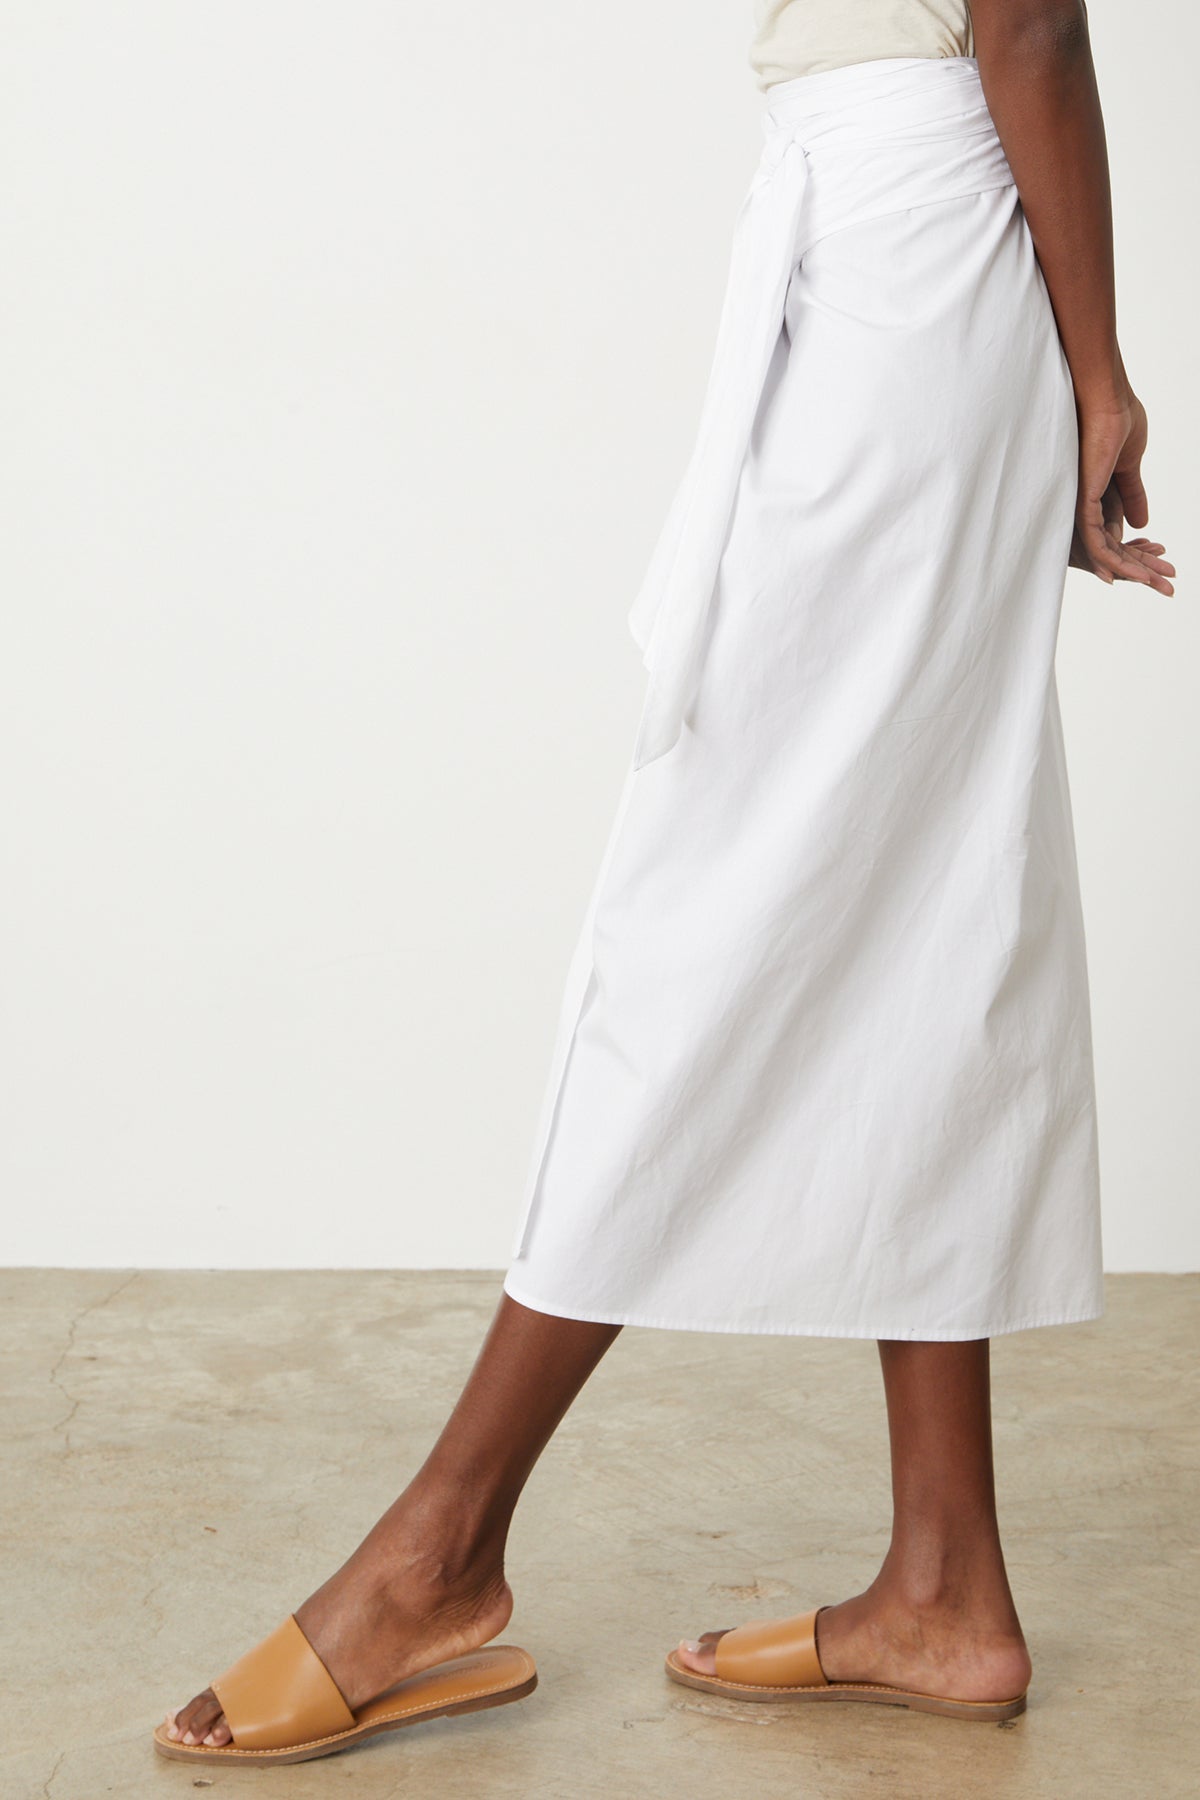   Leena Skirt with tie in front white side 